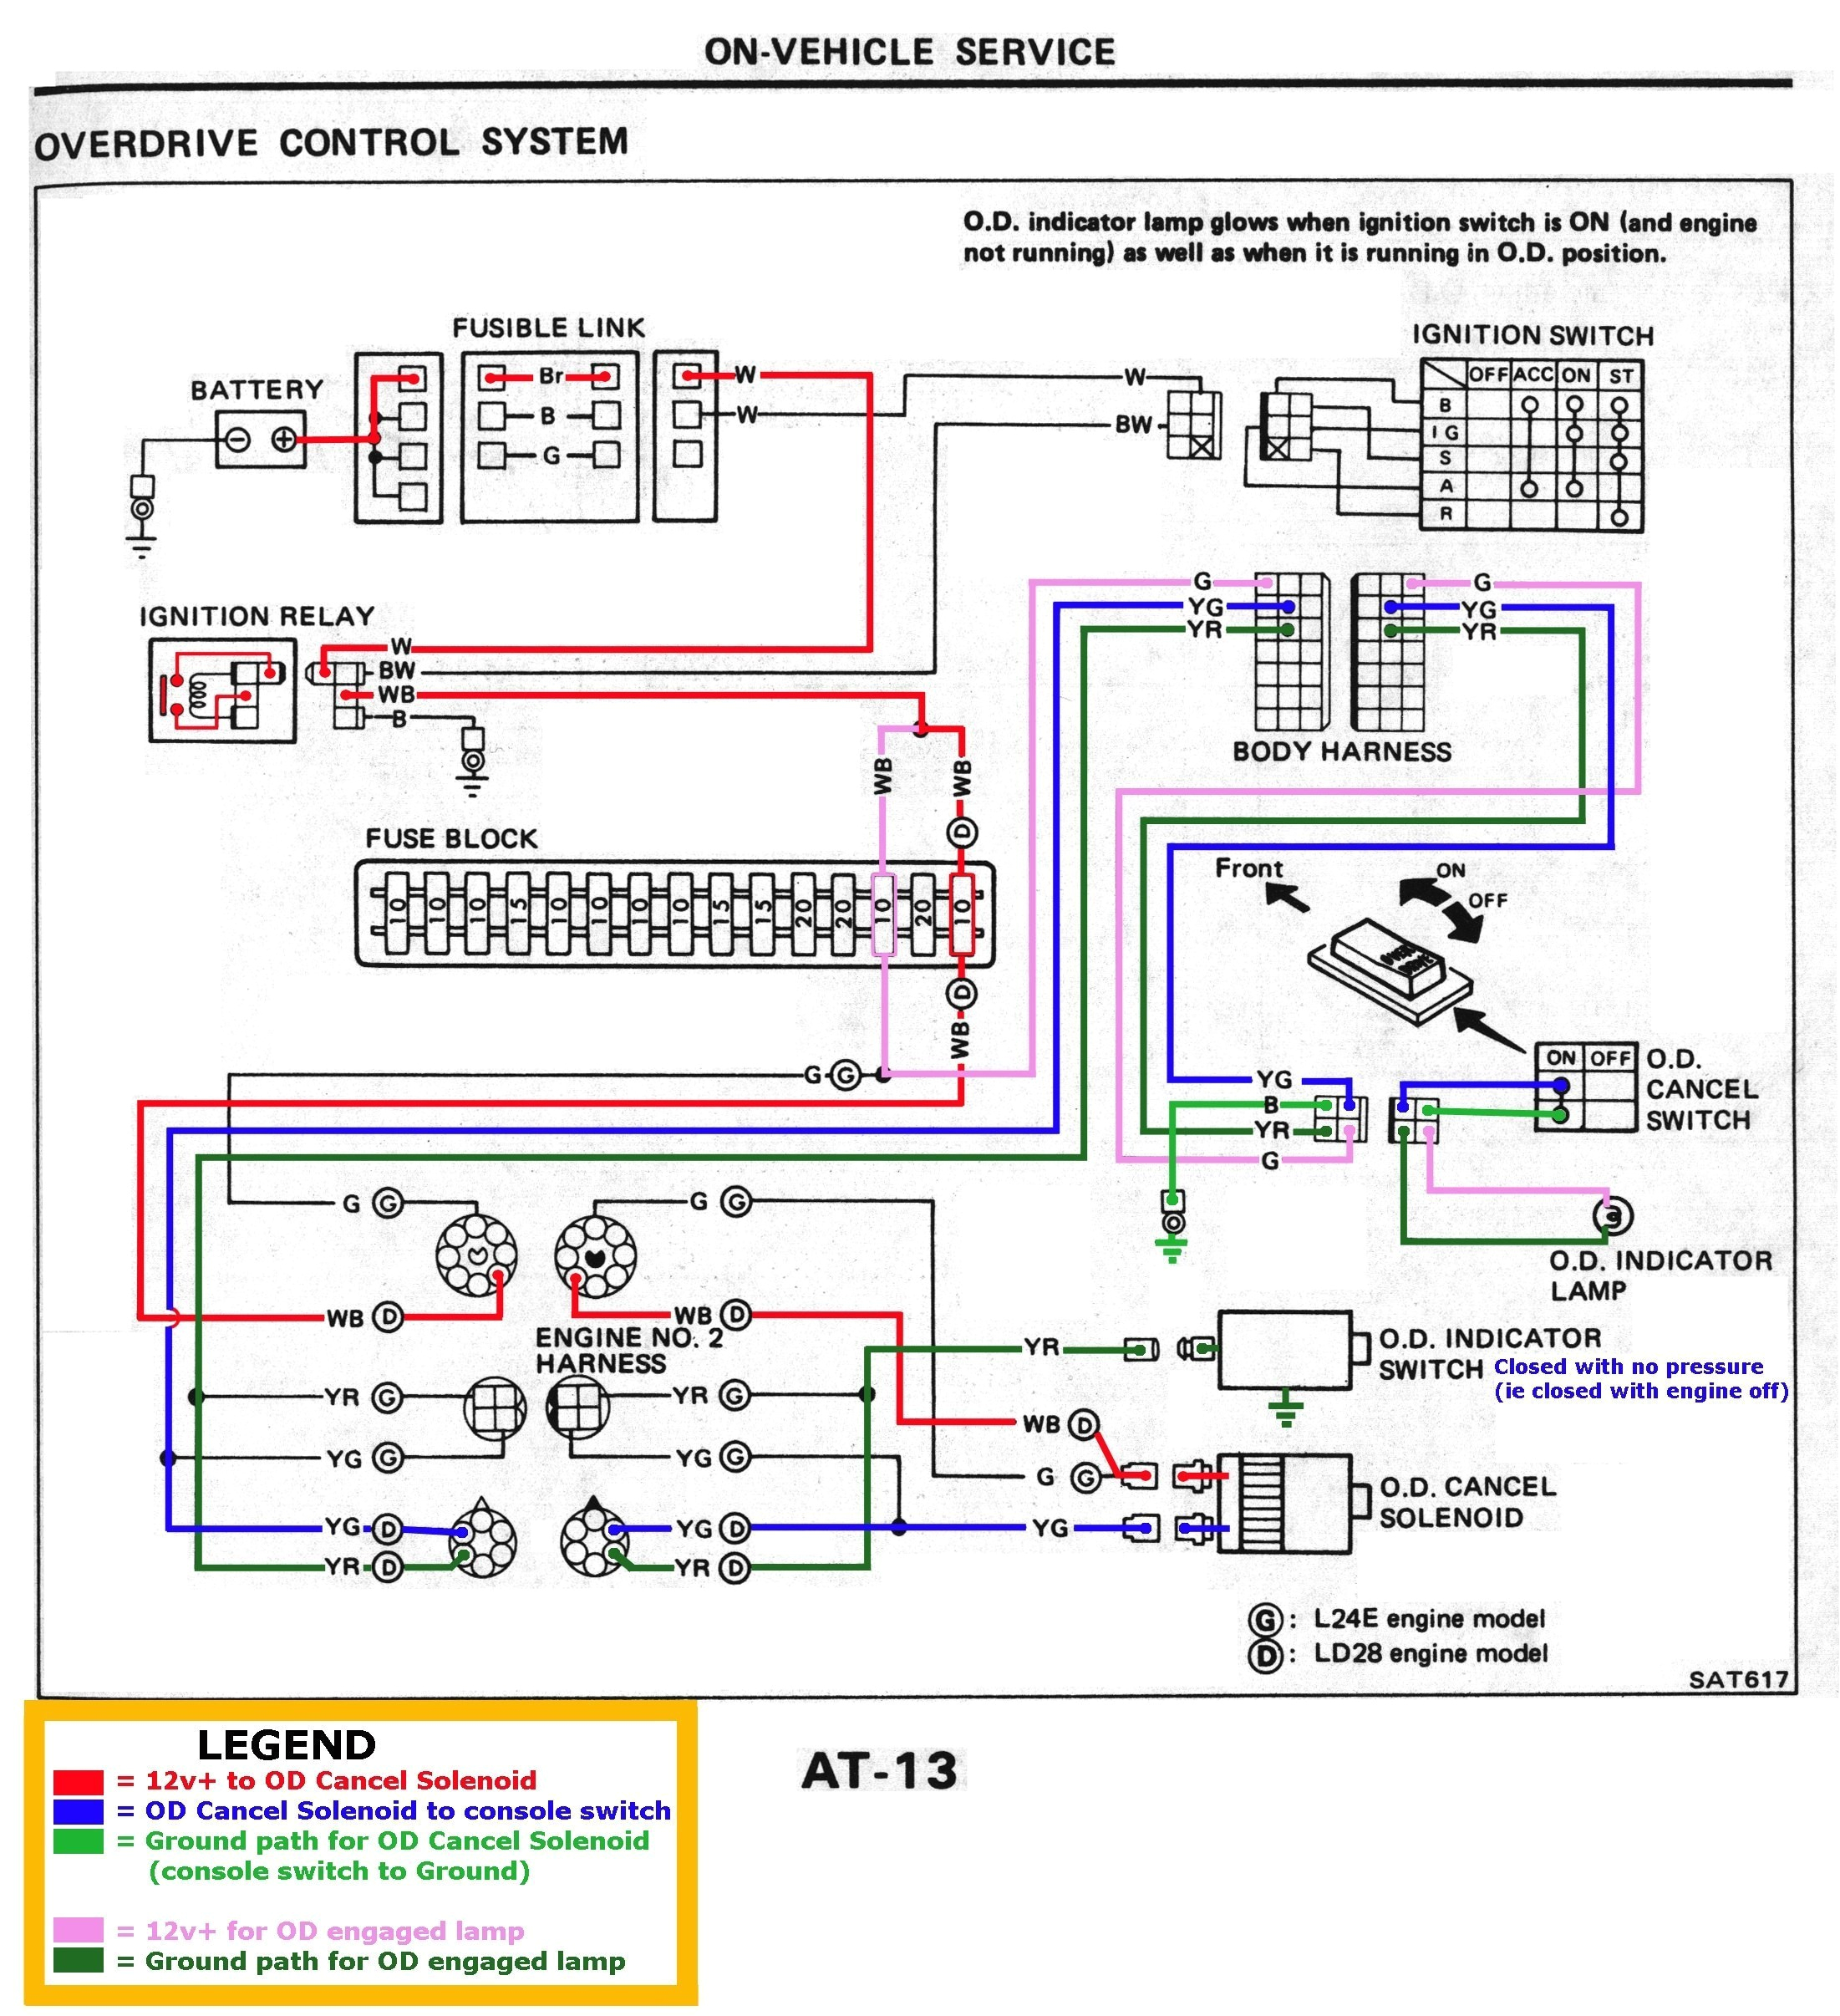 1993 sx 240 wiring diagram wiring diagram post1993 sx 240 wiring diagram wiring library 1993 sx